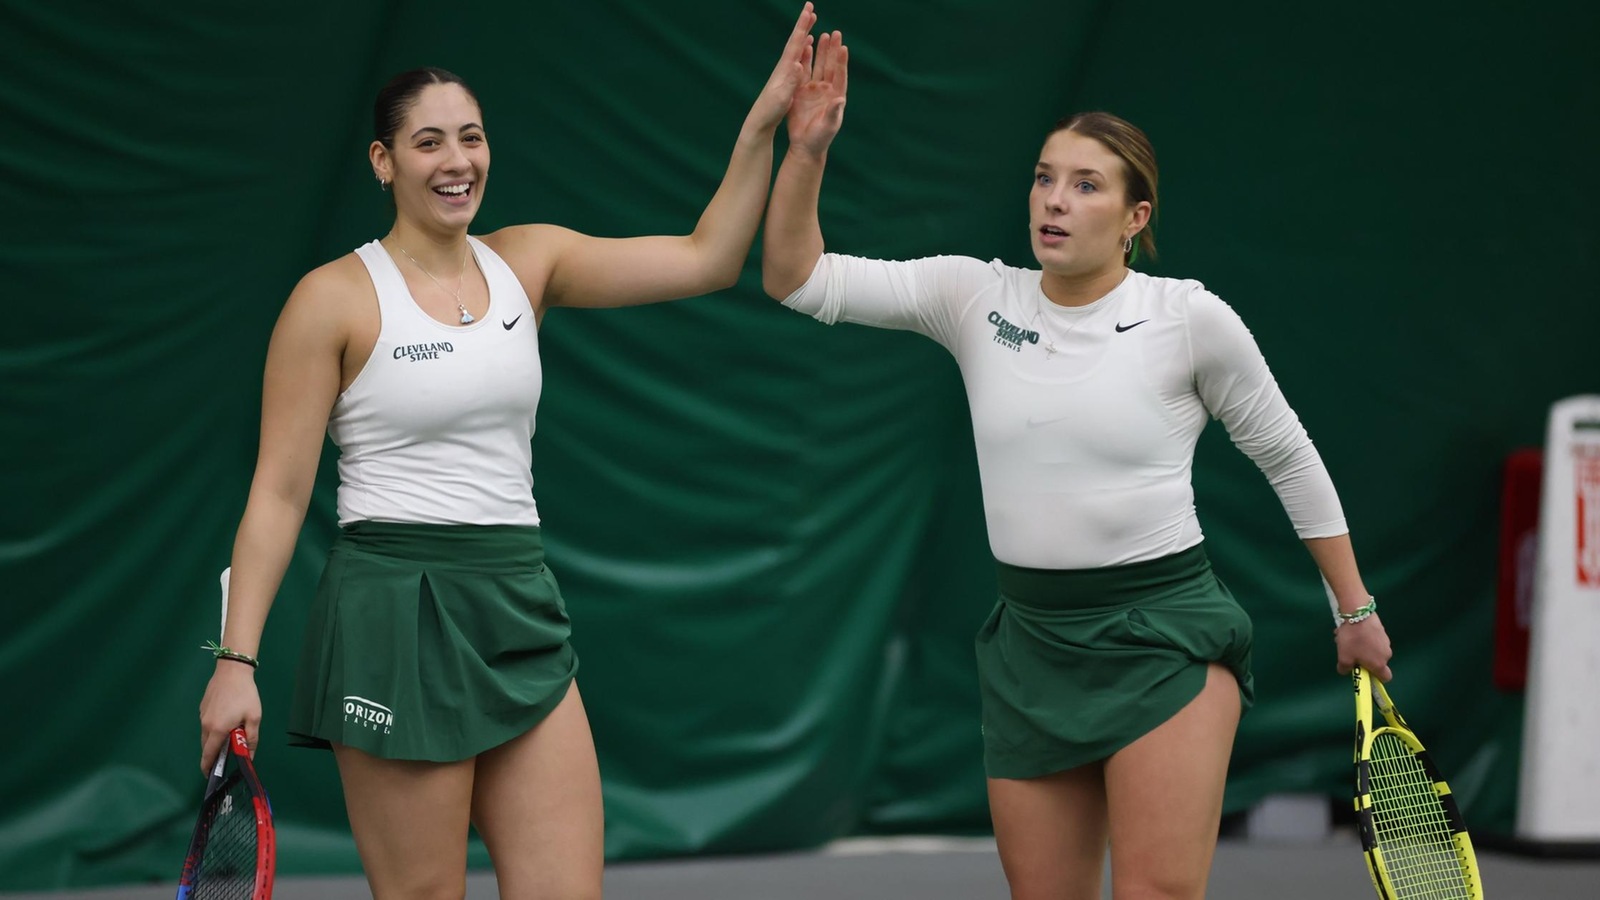 Cleveland State Women’s Tennis Earns 7-0 Sweep Over IUPUI